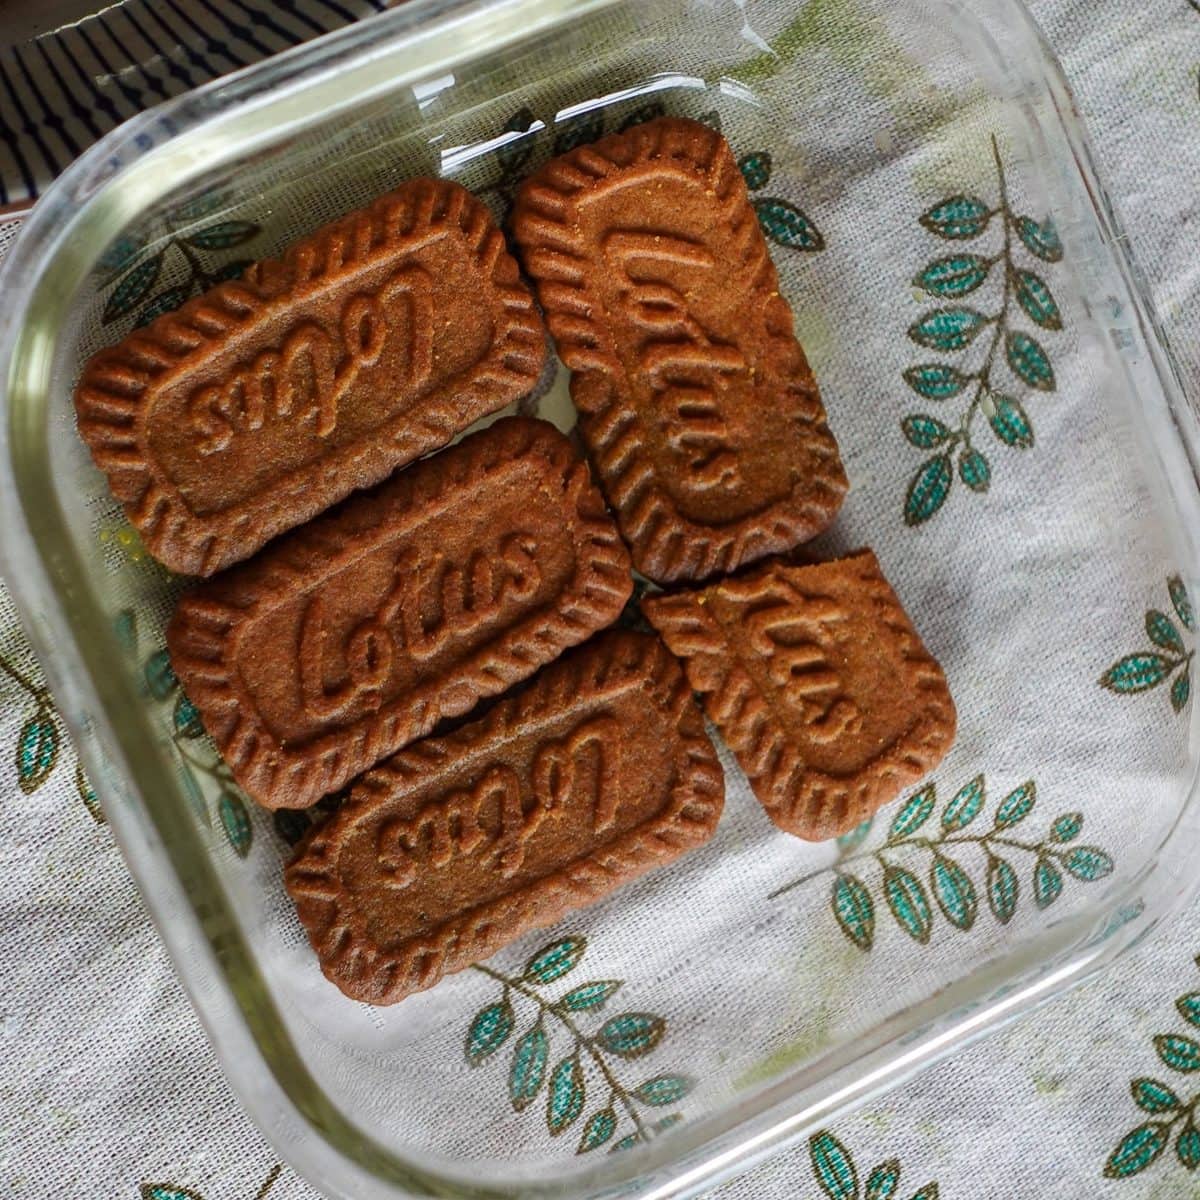 Add a layer of Biscoff cookies